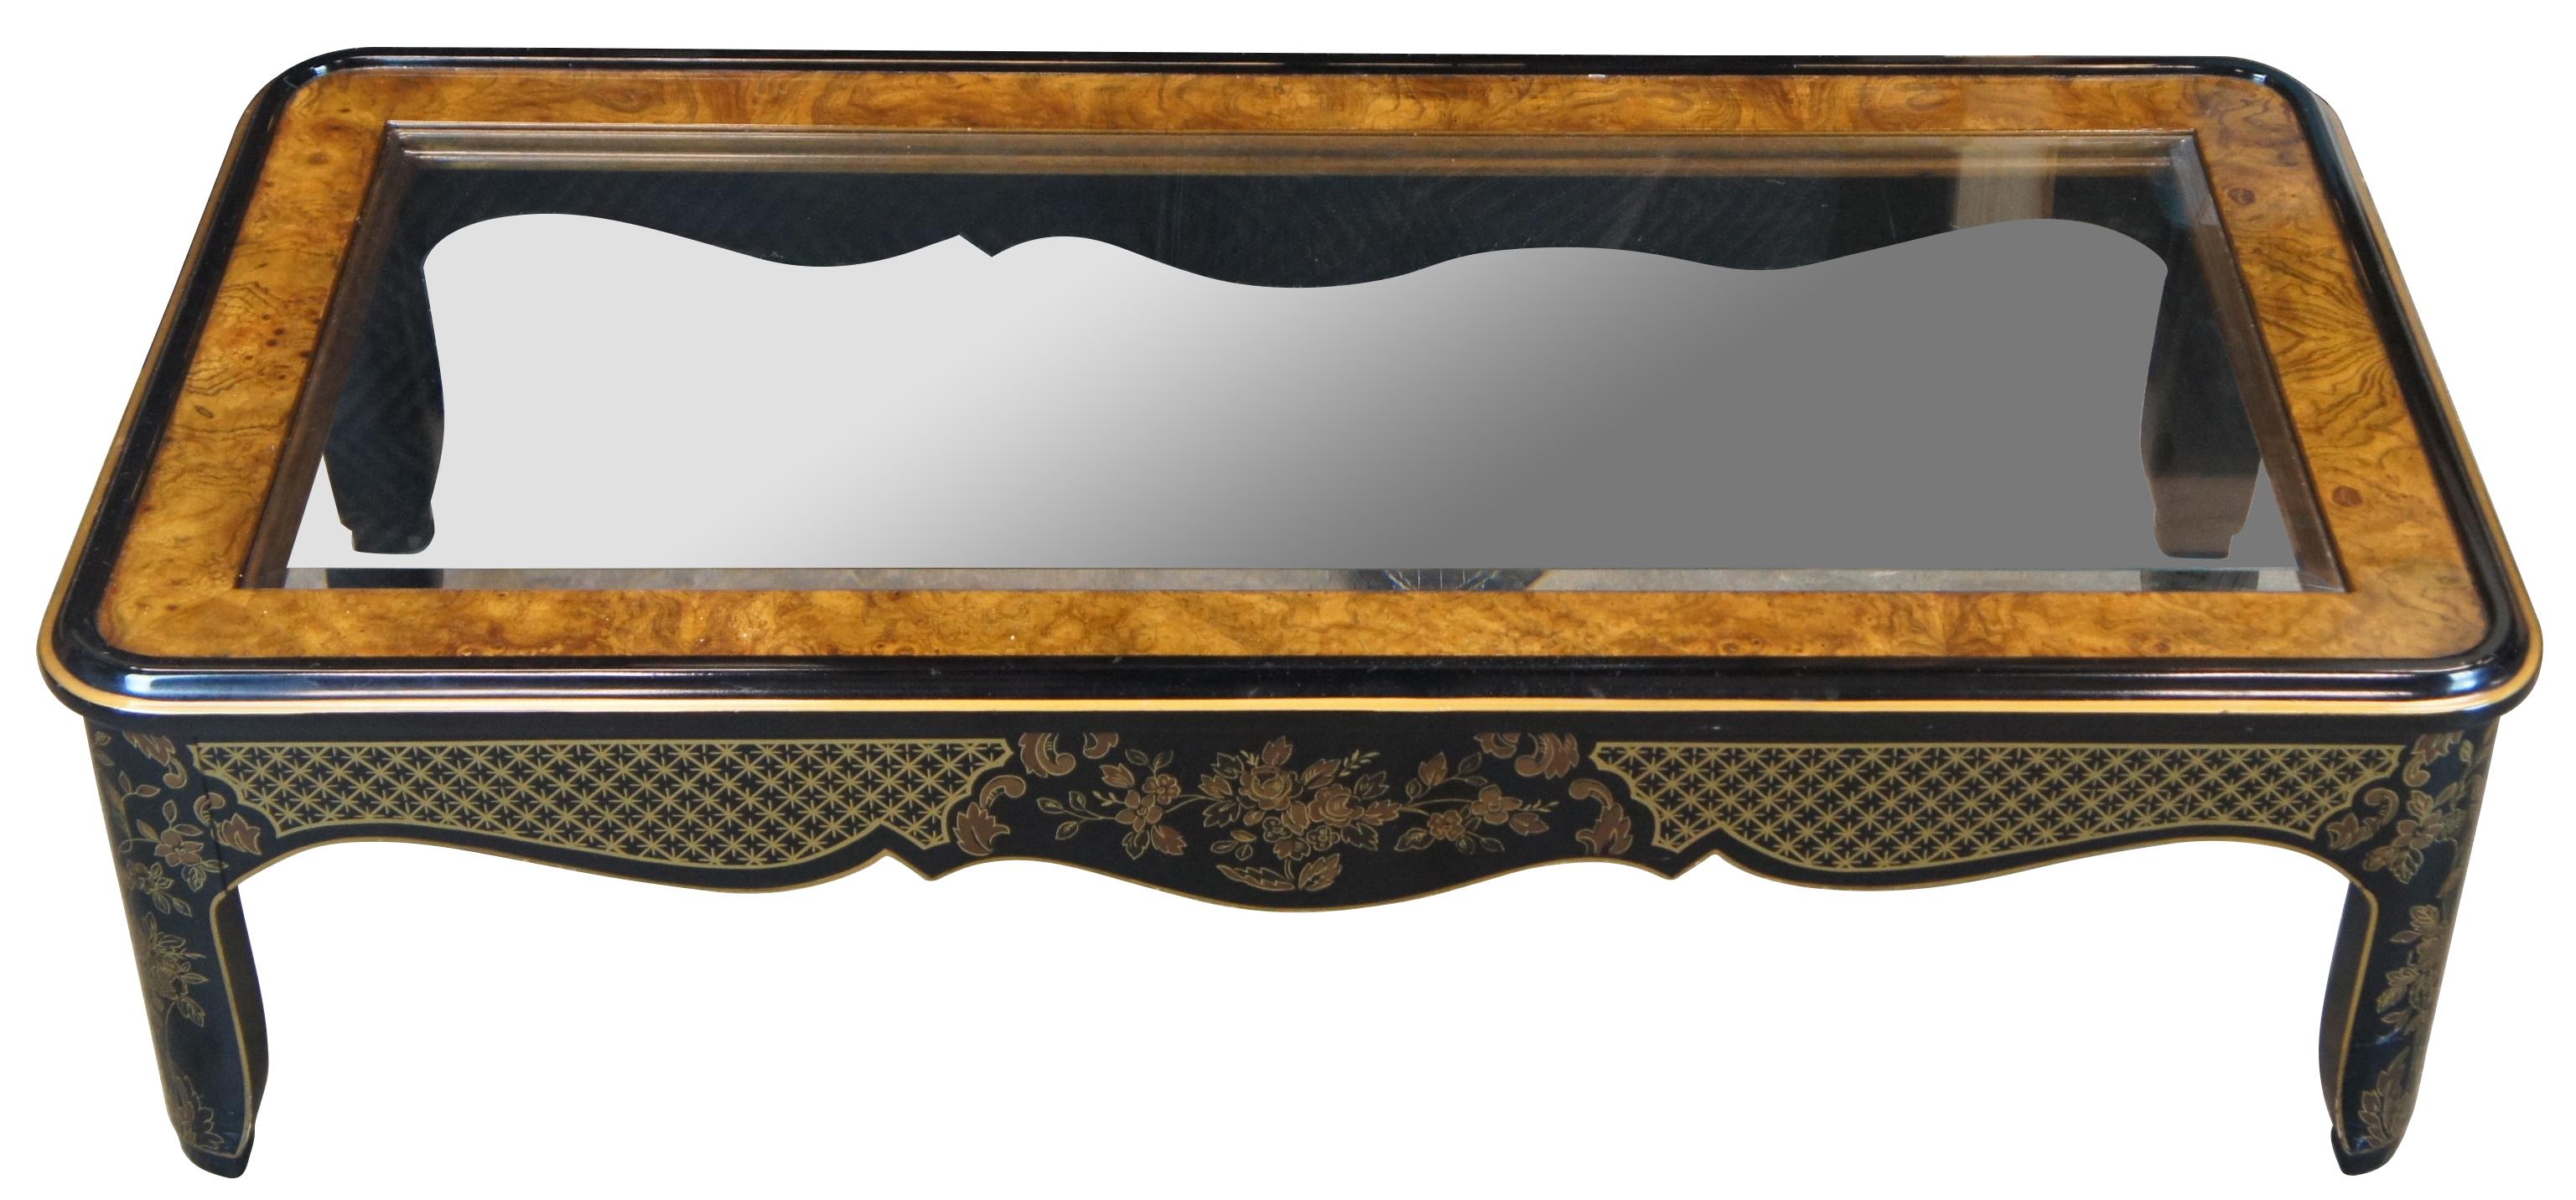 Drexel Heritage Et Cetera coffee table, circa 1980s. Features rectangular Hollywood Regency form with Chinoiserie japanned (black lacquer) hand painted motif with gold detail of florals / flowers, lattice designs and ashwood burled edge with beveled